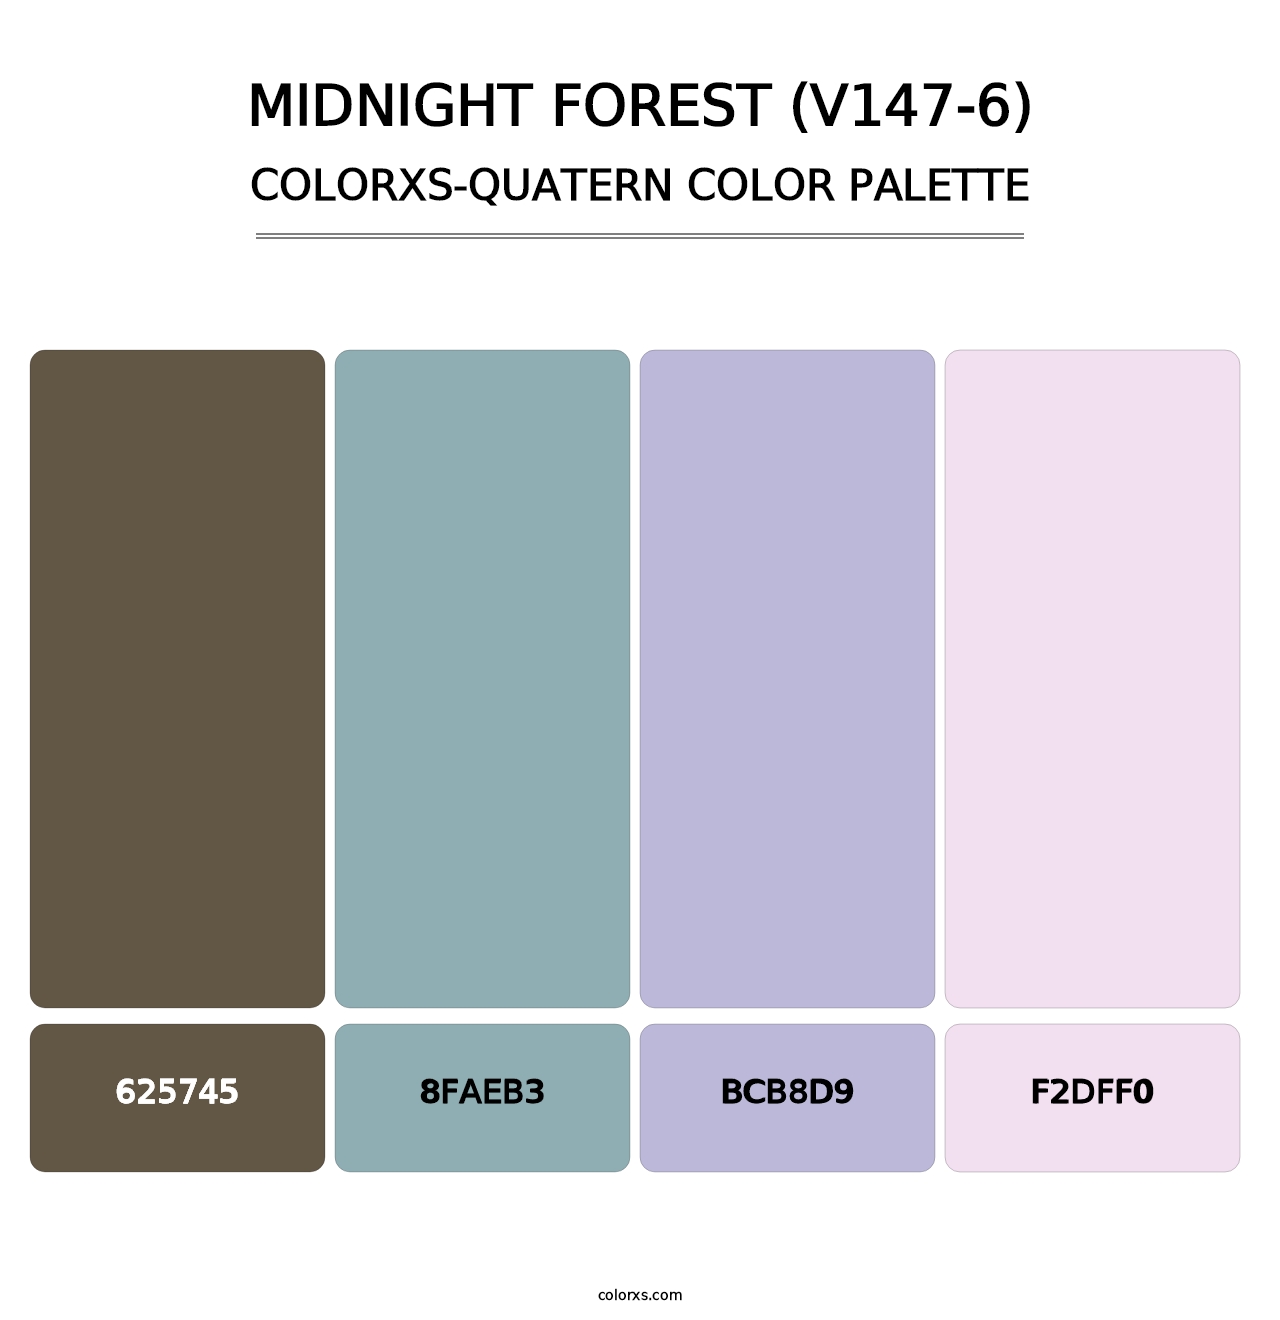 Midnight Forest (V147-6) - Colorxs Quatern Palette